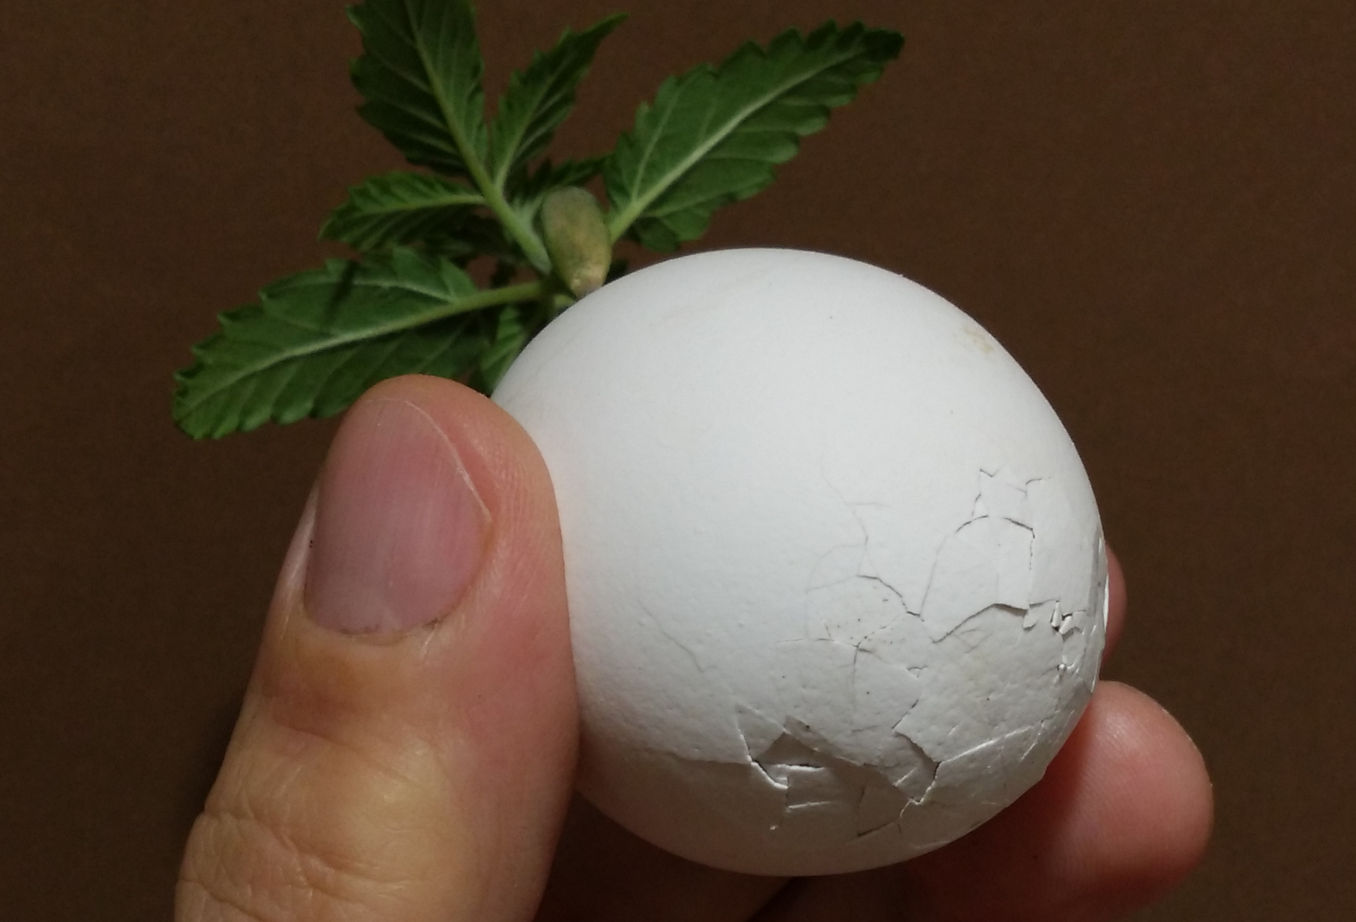 eggshells in weed plants; now remove the pieces oof the shell